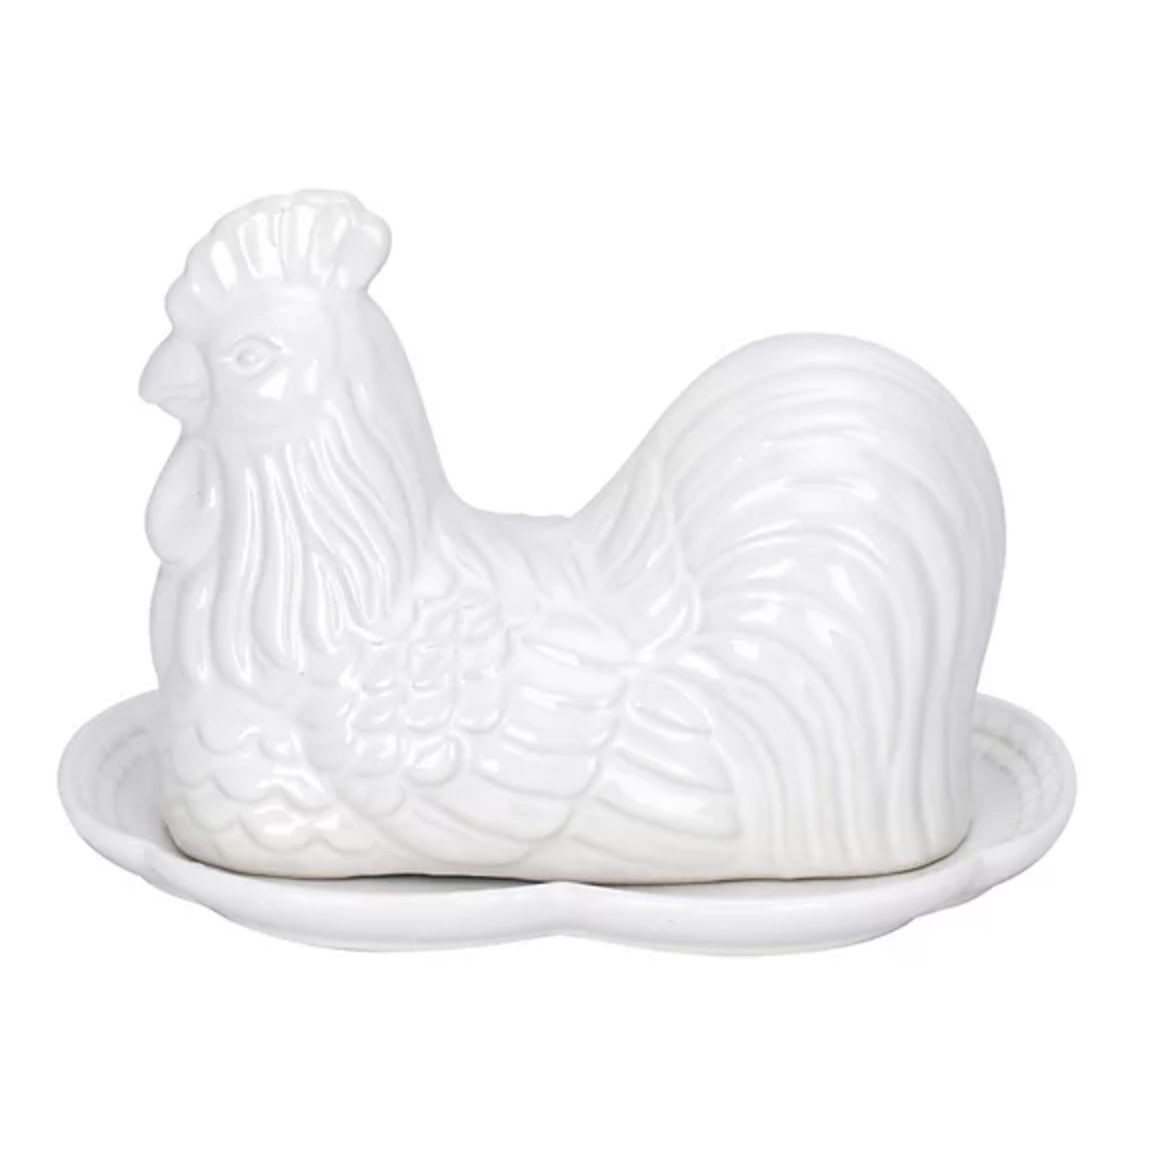 Rooster Kitchen Decor Butter Dish